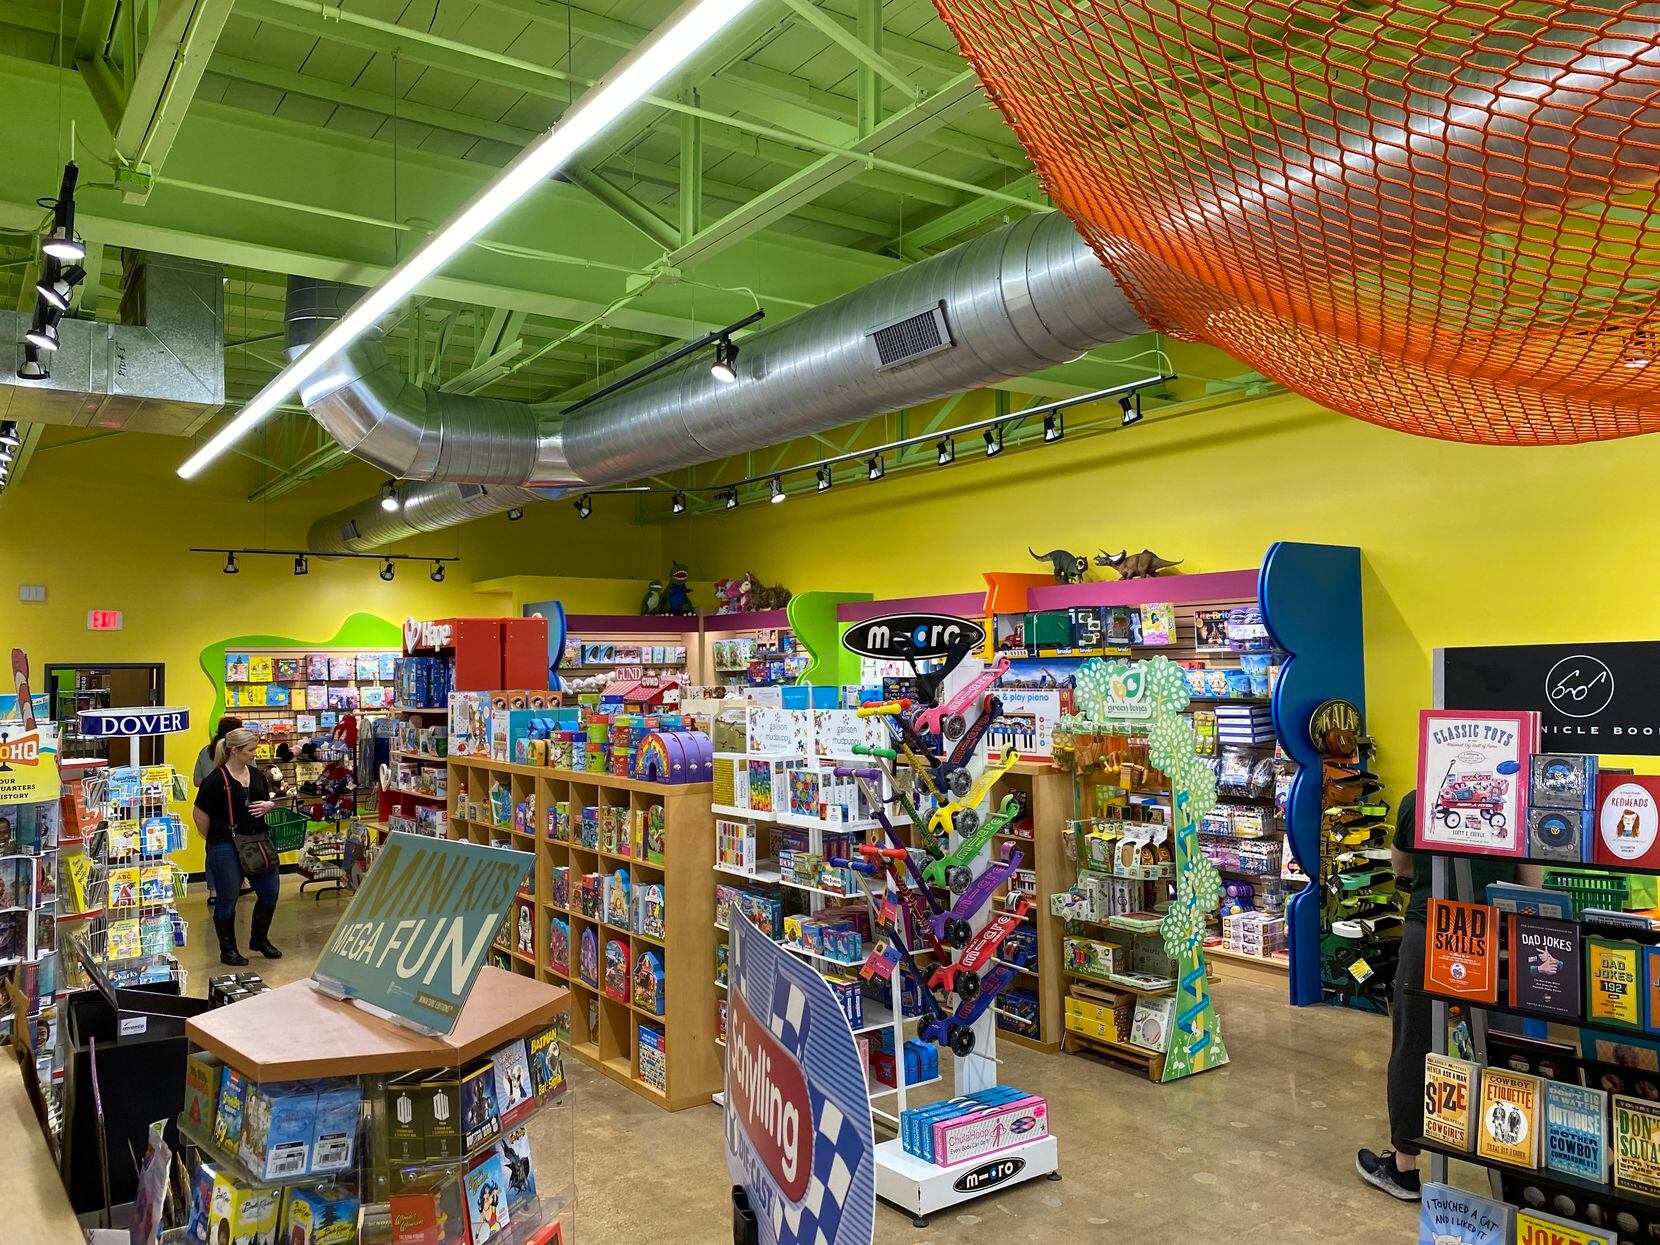 The inside of the new Froggie's 5 & 10 toy and gift shop location in Hillside Village...